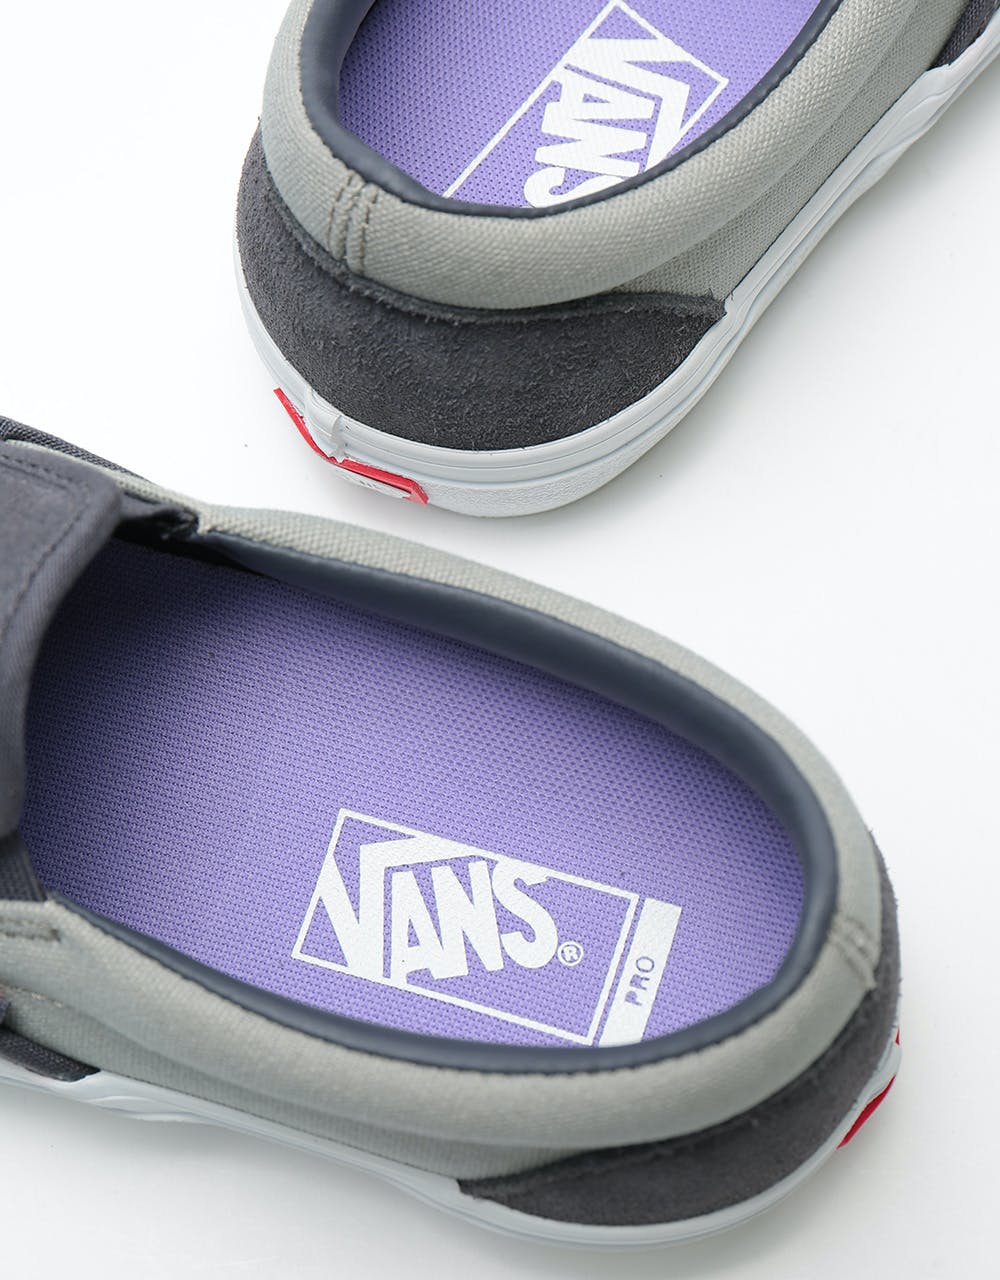 Vans Slip-On Pro Skate Shoes - Periscope/Drizzle